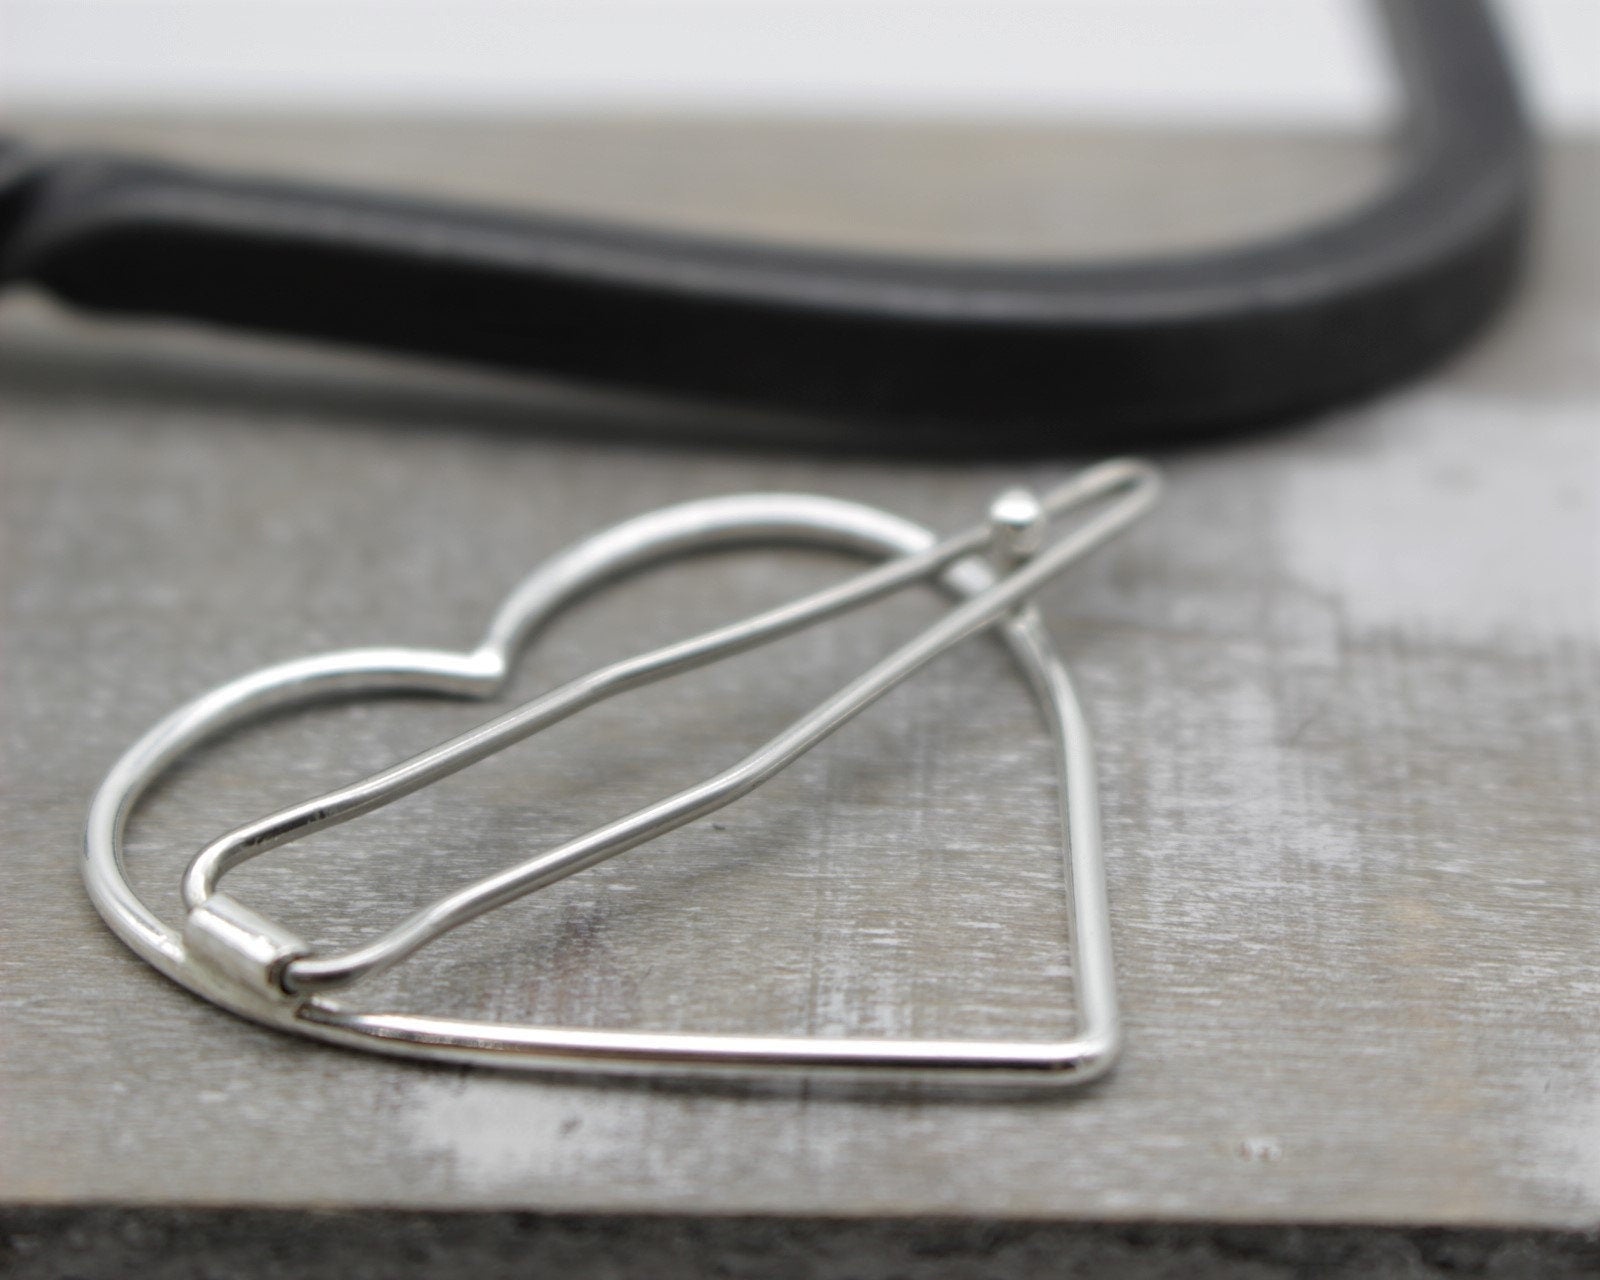 Small Heart Barrette - Sterling Silver Barrette - Gift for Her - Girls Barrette - Hair pin - Hair Jewelry